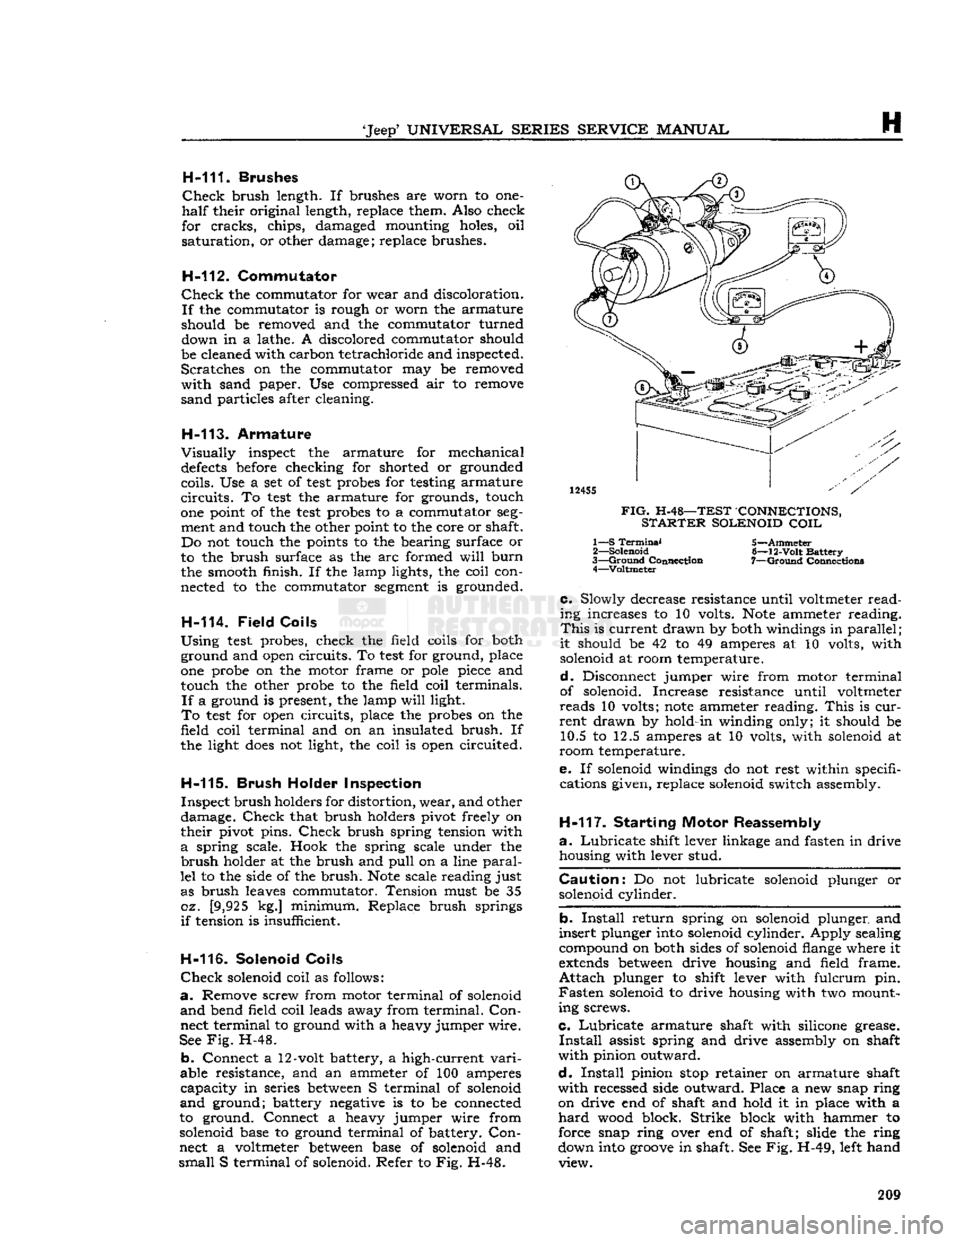 JEEP CJ 1953 Owners Manual 
Jeep
 UNIVERSAL
 SERIES SERVICE
 MANUAL 

H 
H-111.
 Brushes 

Check
 brush length. If brushes are worn to one-

half
 their original length, replace them. Also check 
for
 cracks,
 chips, damaged 